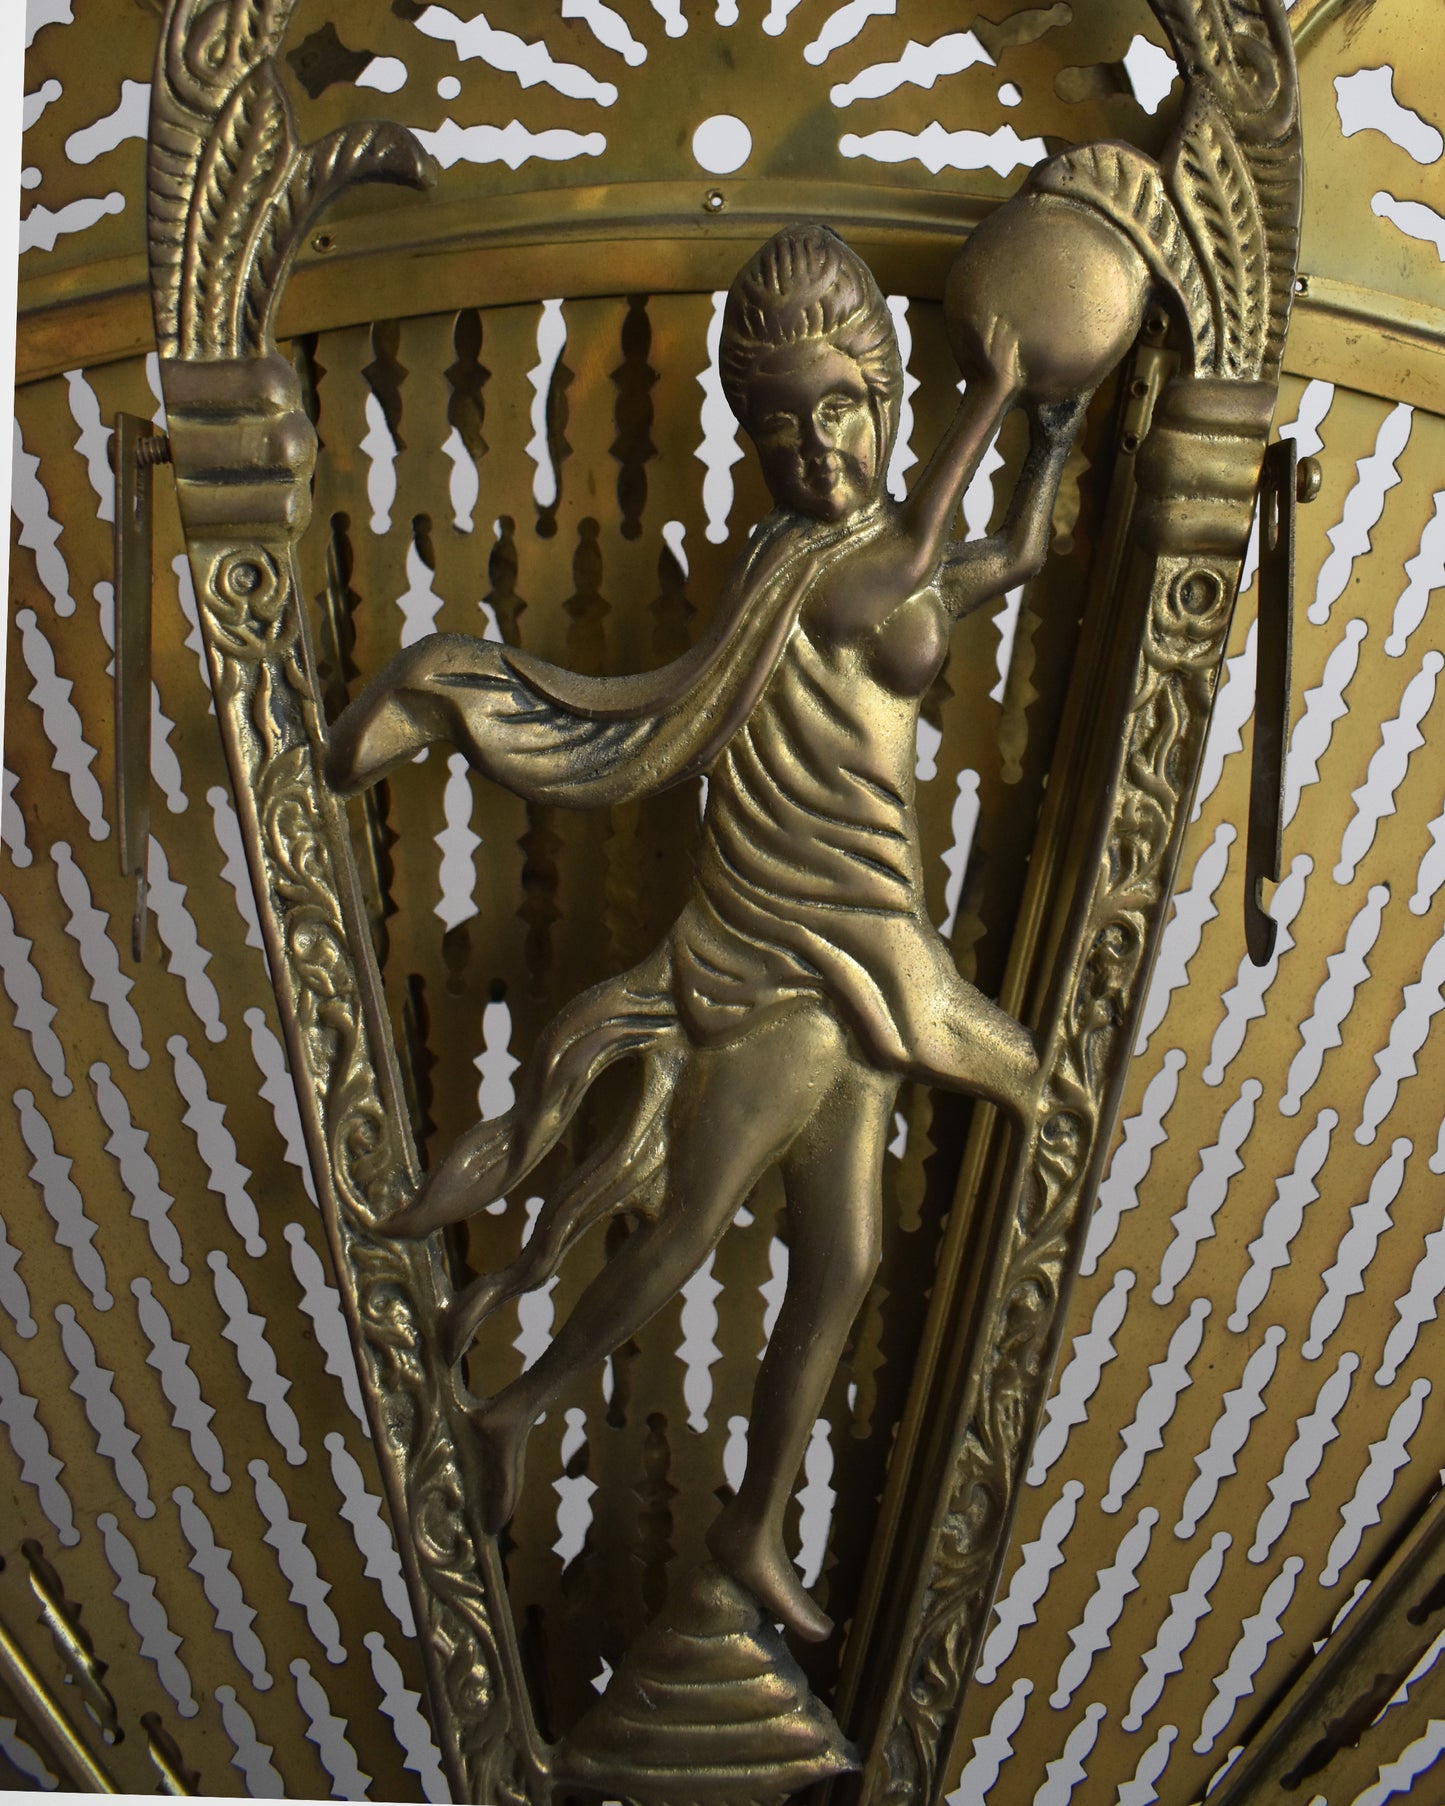 Close up of the ornate detail and person on the fan